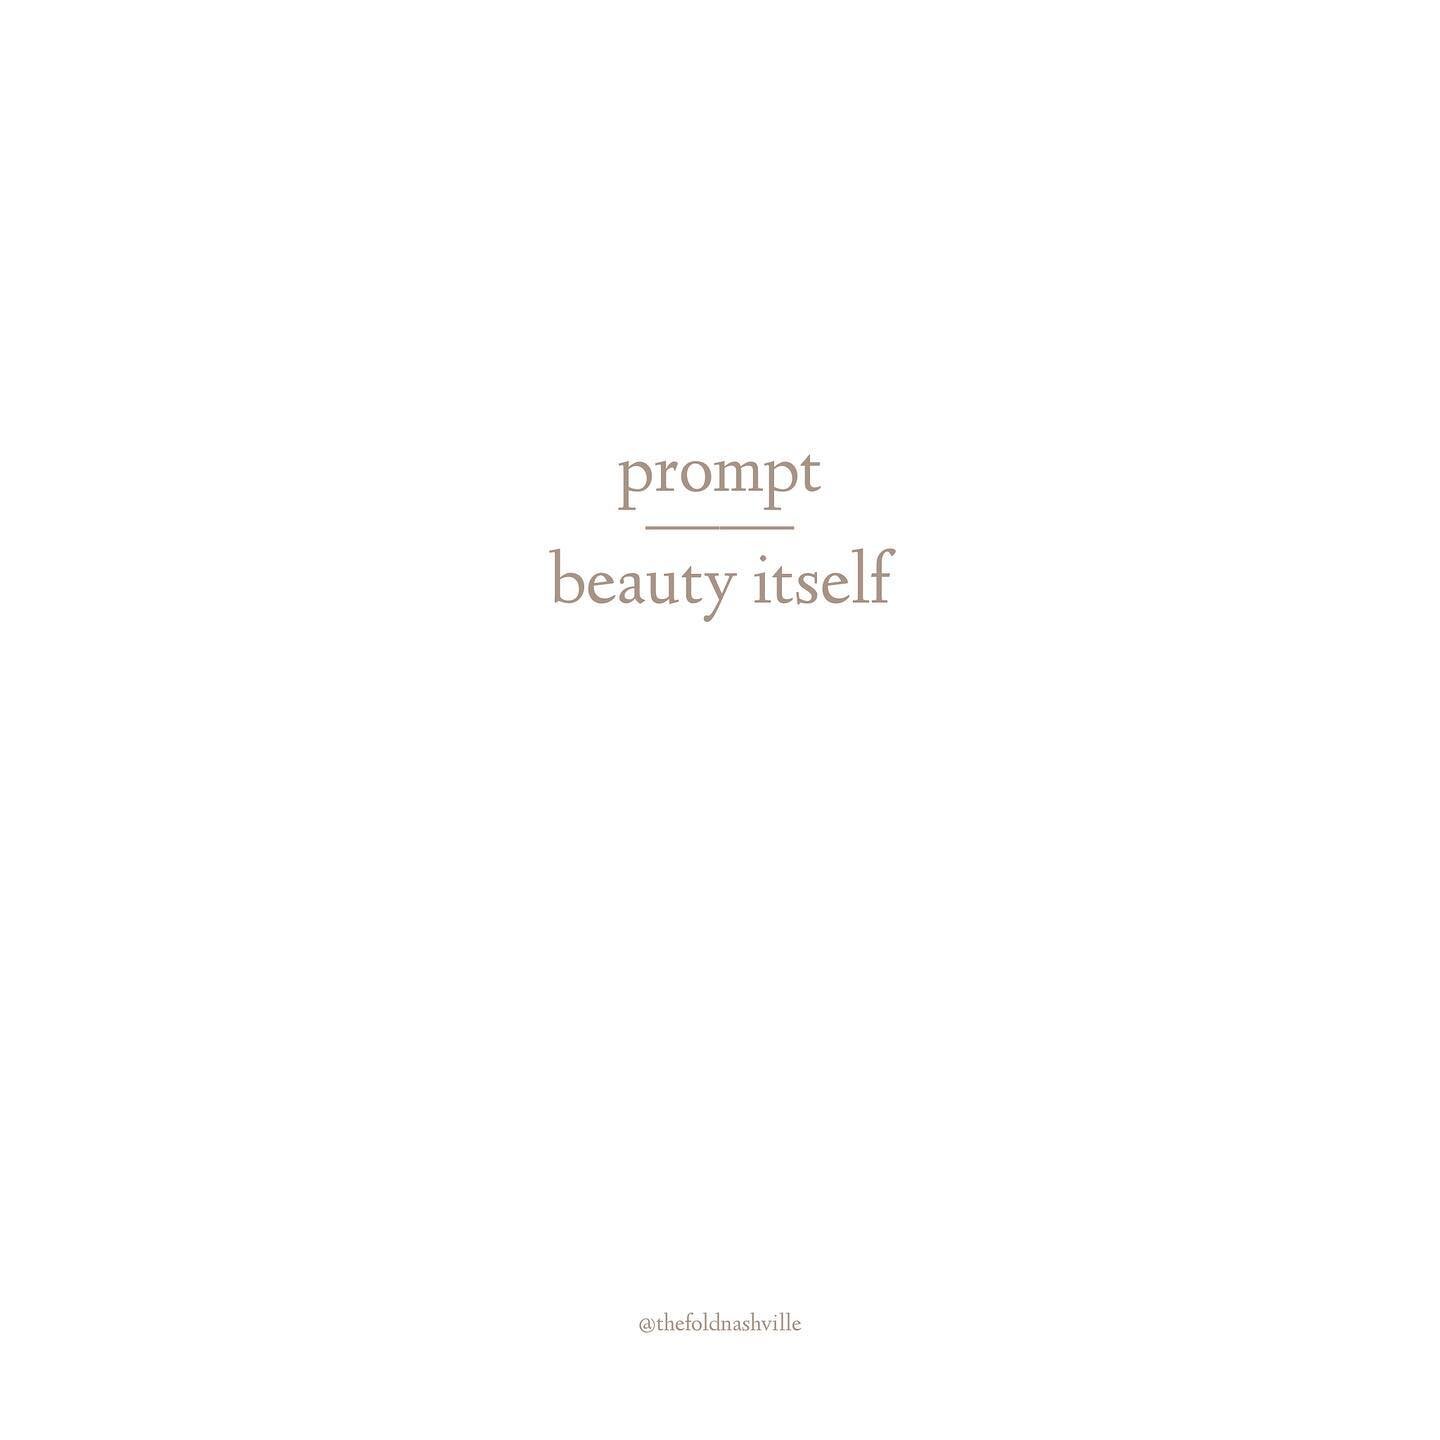 Let&rsquo;s write together today. ⠀
Prompt : Beauty Itself⠀
⠀
&ldquo;What if man could see Beauty Itself, pure, unalloyed, stripped of mortality and all its pollution, stains, and vanities, unchanging, divine&hellip; the man becoming, in that communi